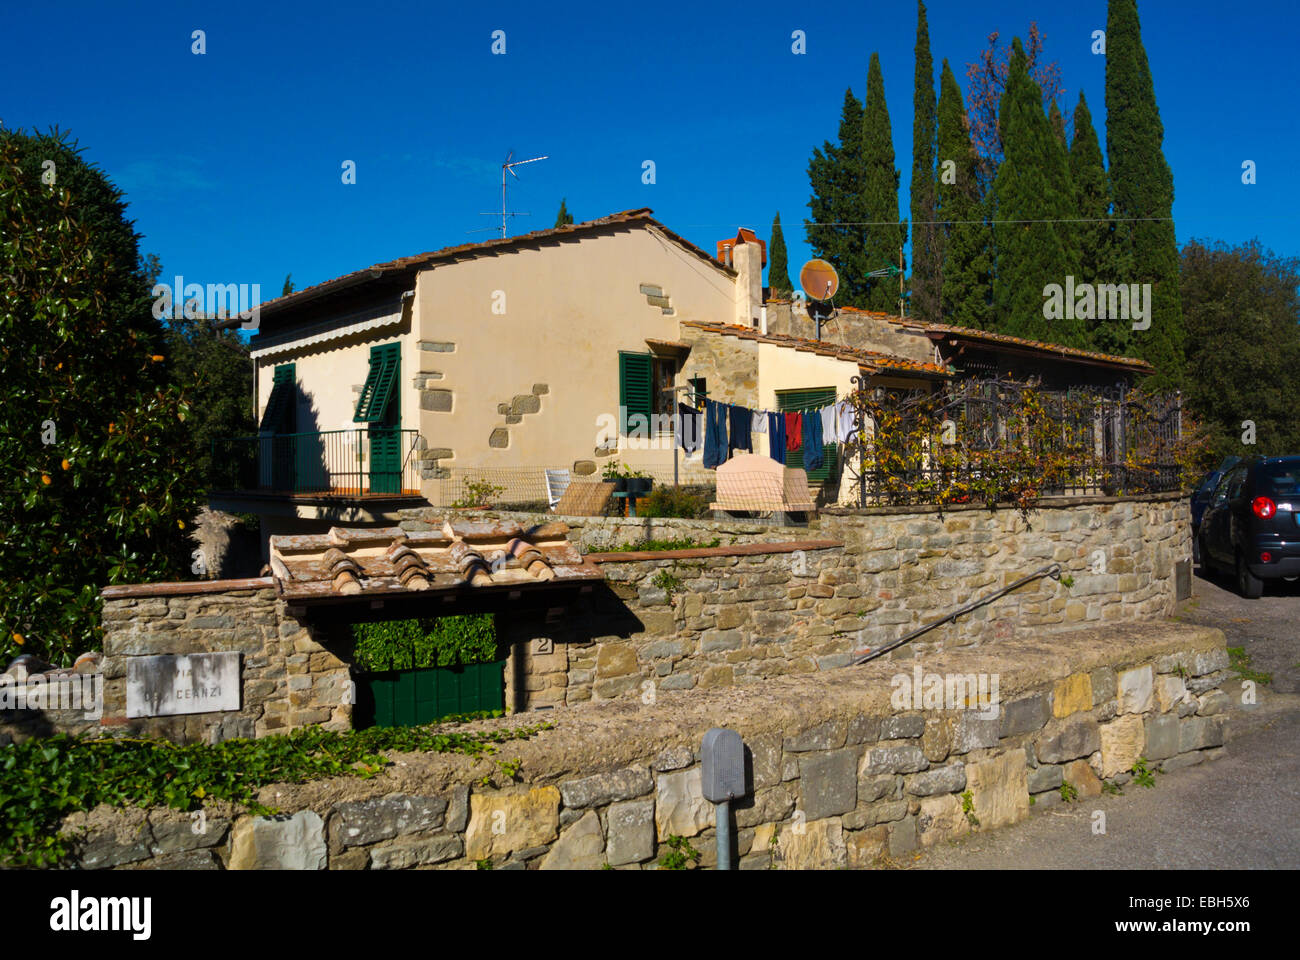 Residential housing, Fiesole, near Florence, Tuscany, Italy Stock Photo